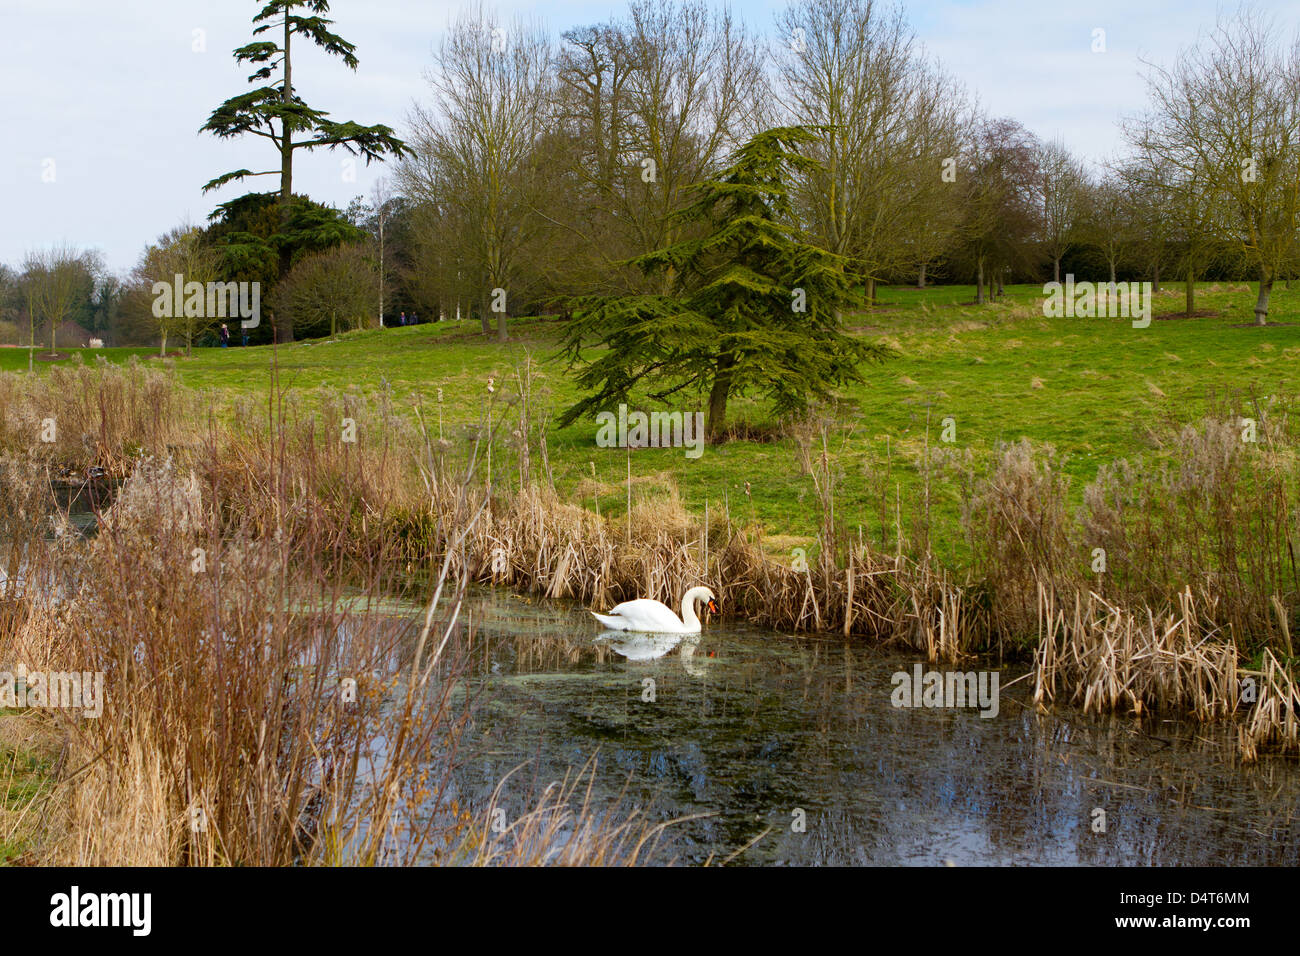 swan in river in an english countryside scene on a cold winter day Stock Photo